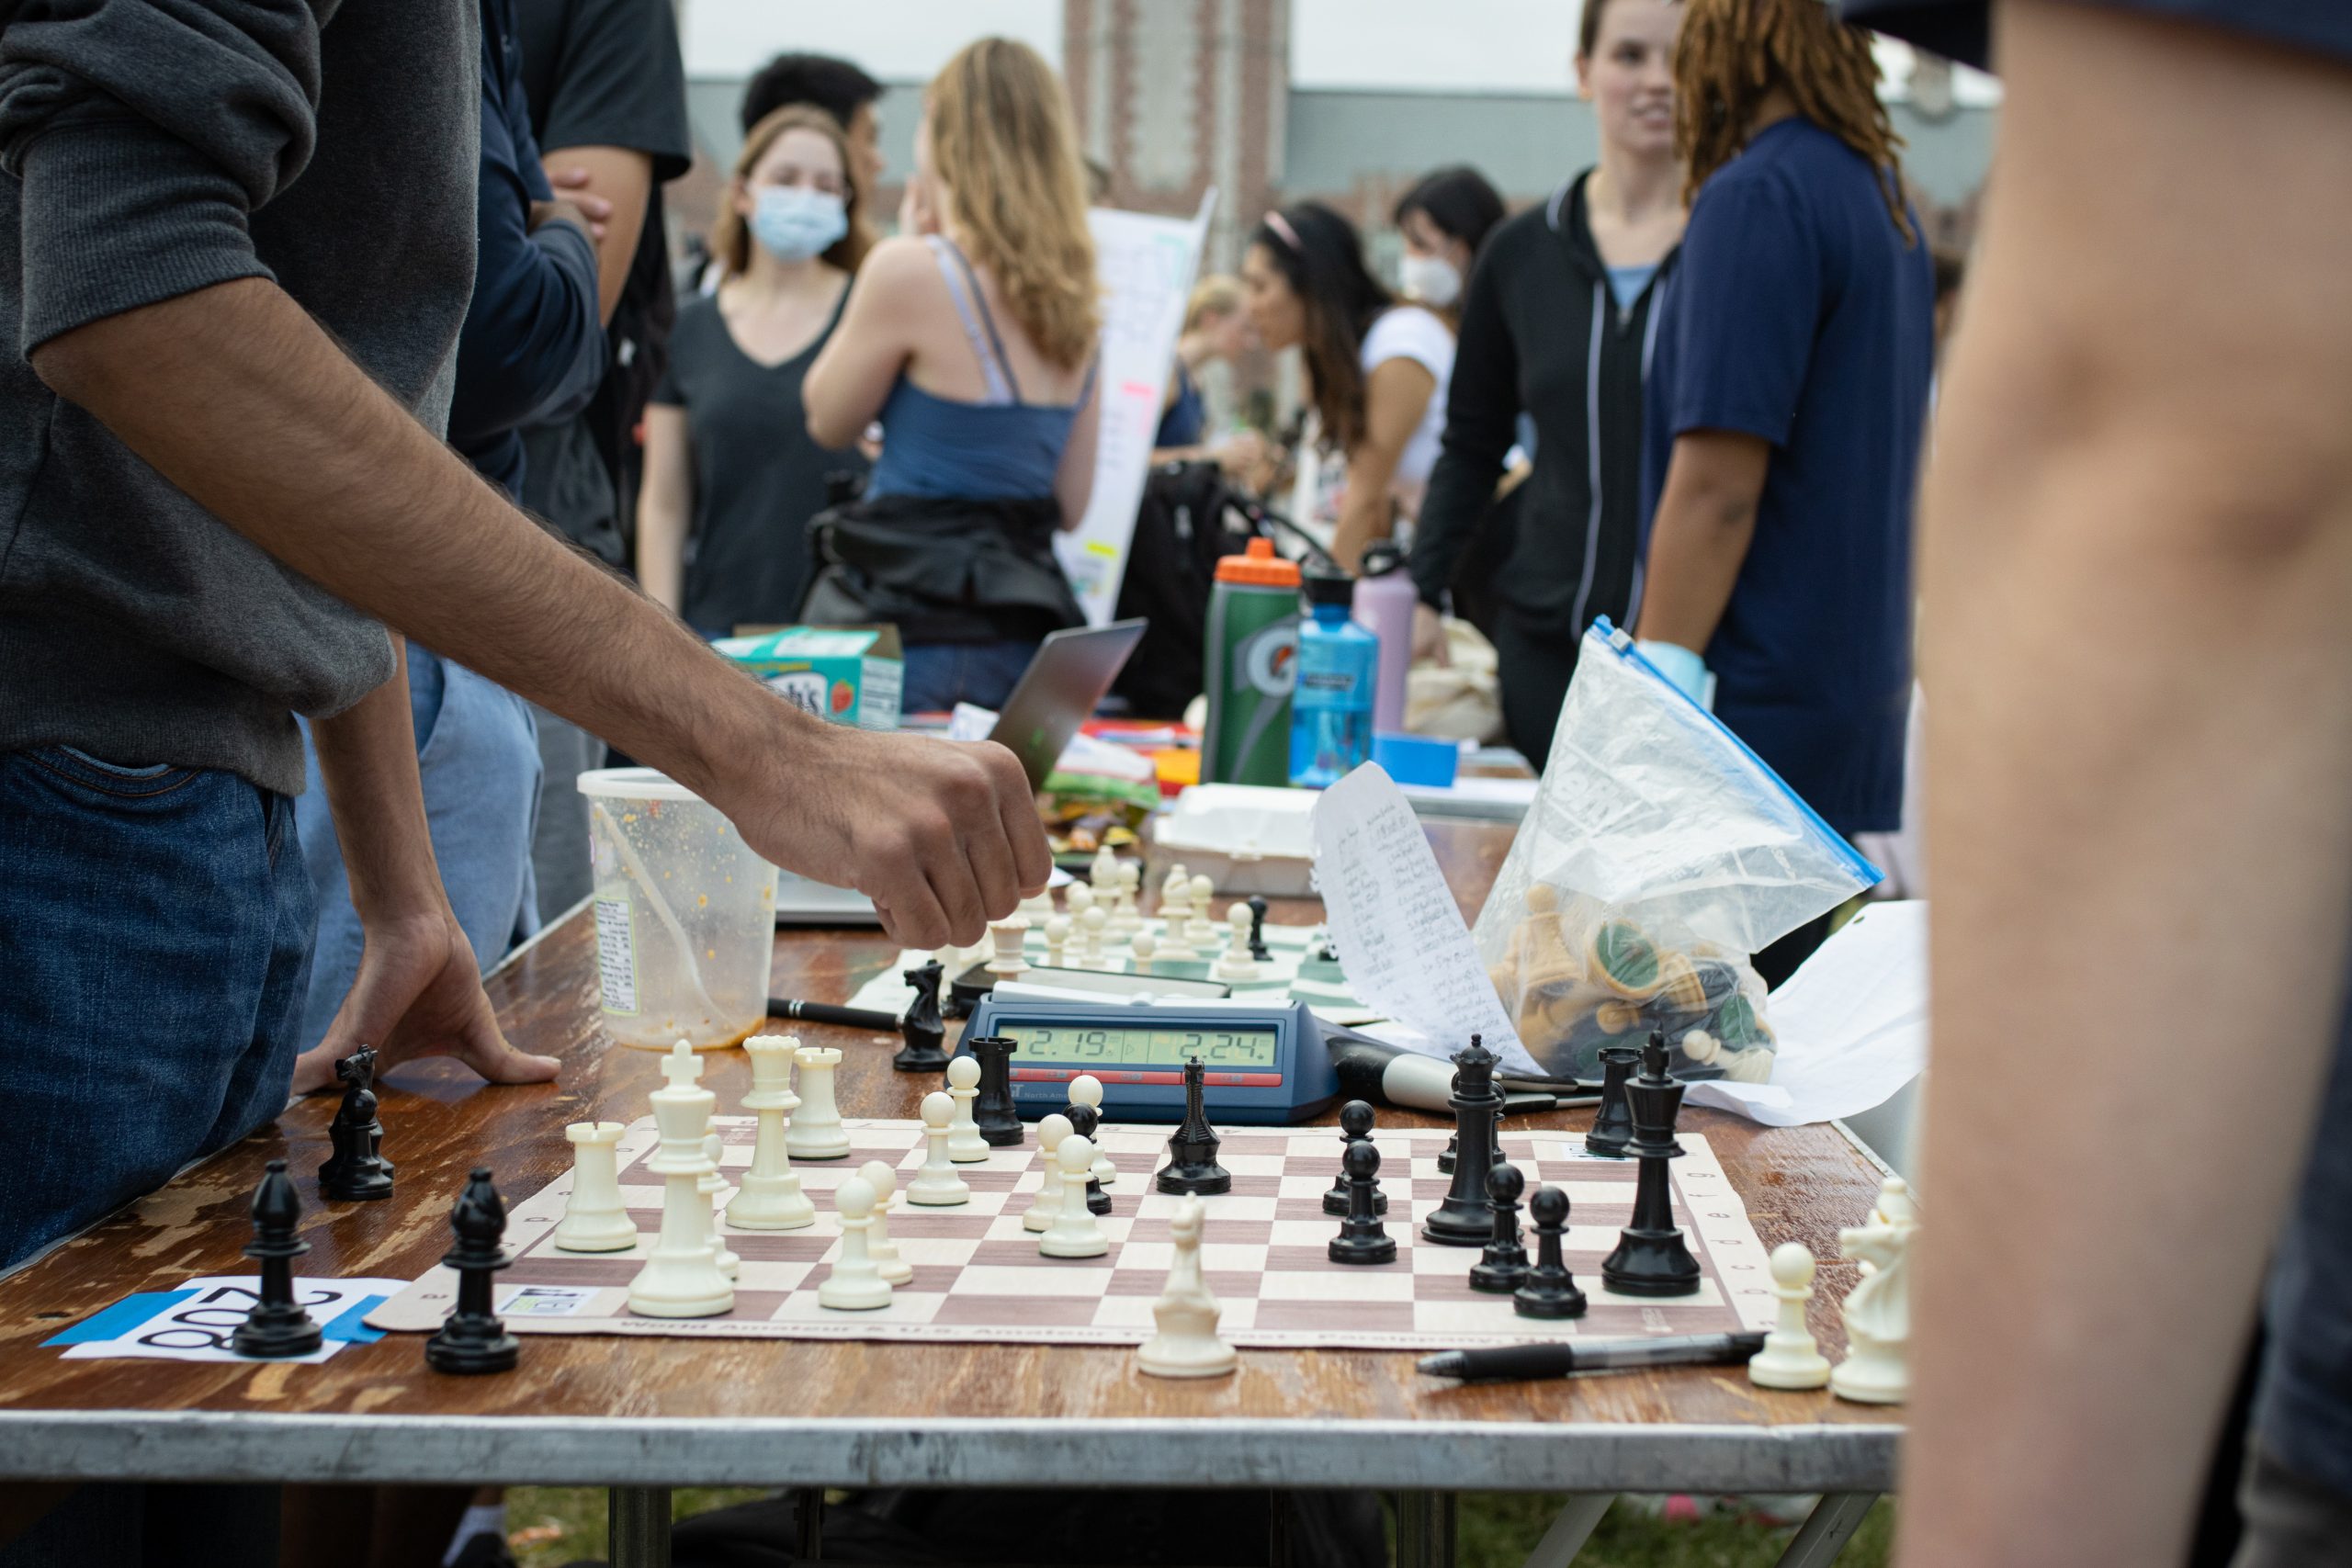 A chess board sits on a table surrounded by students.